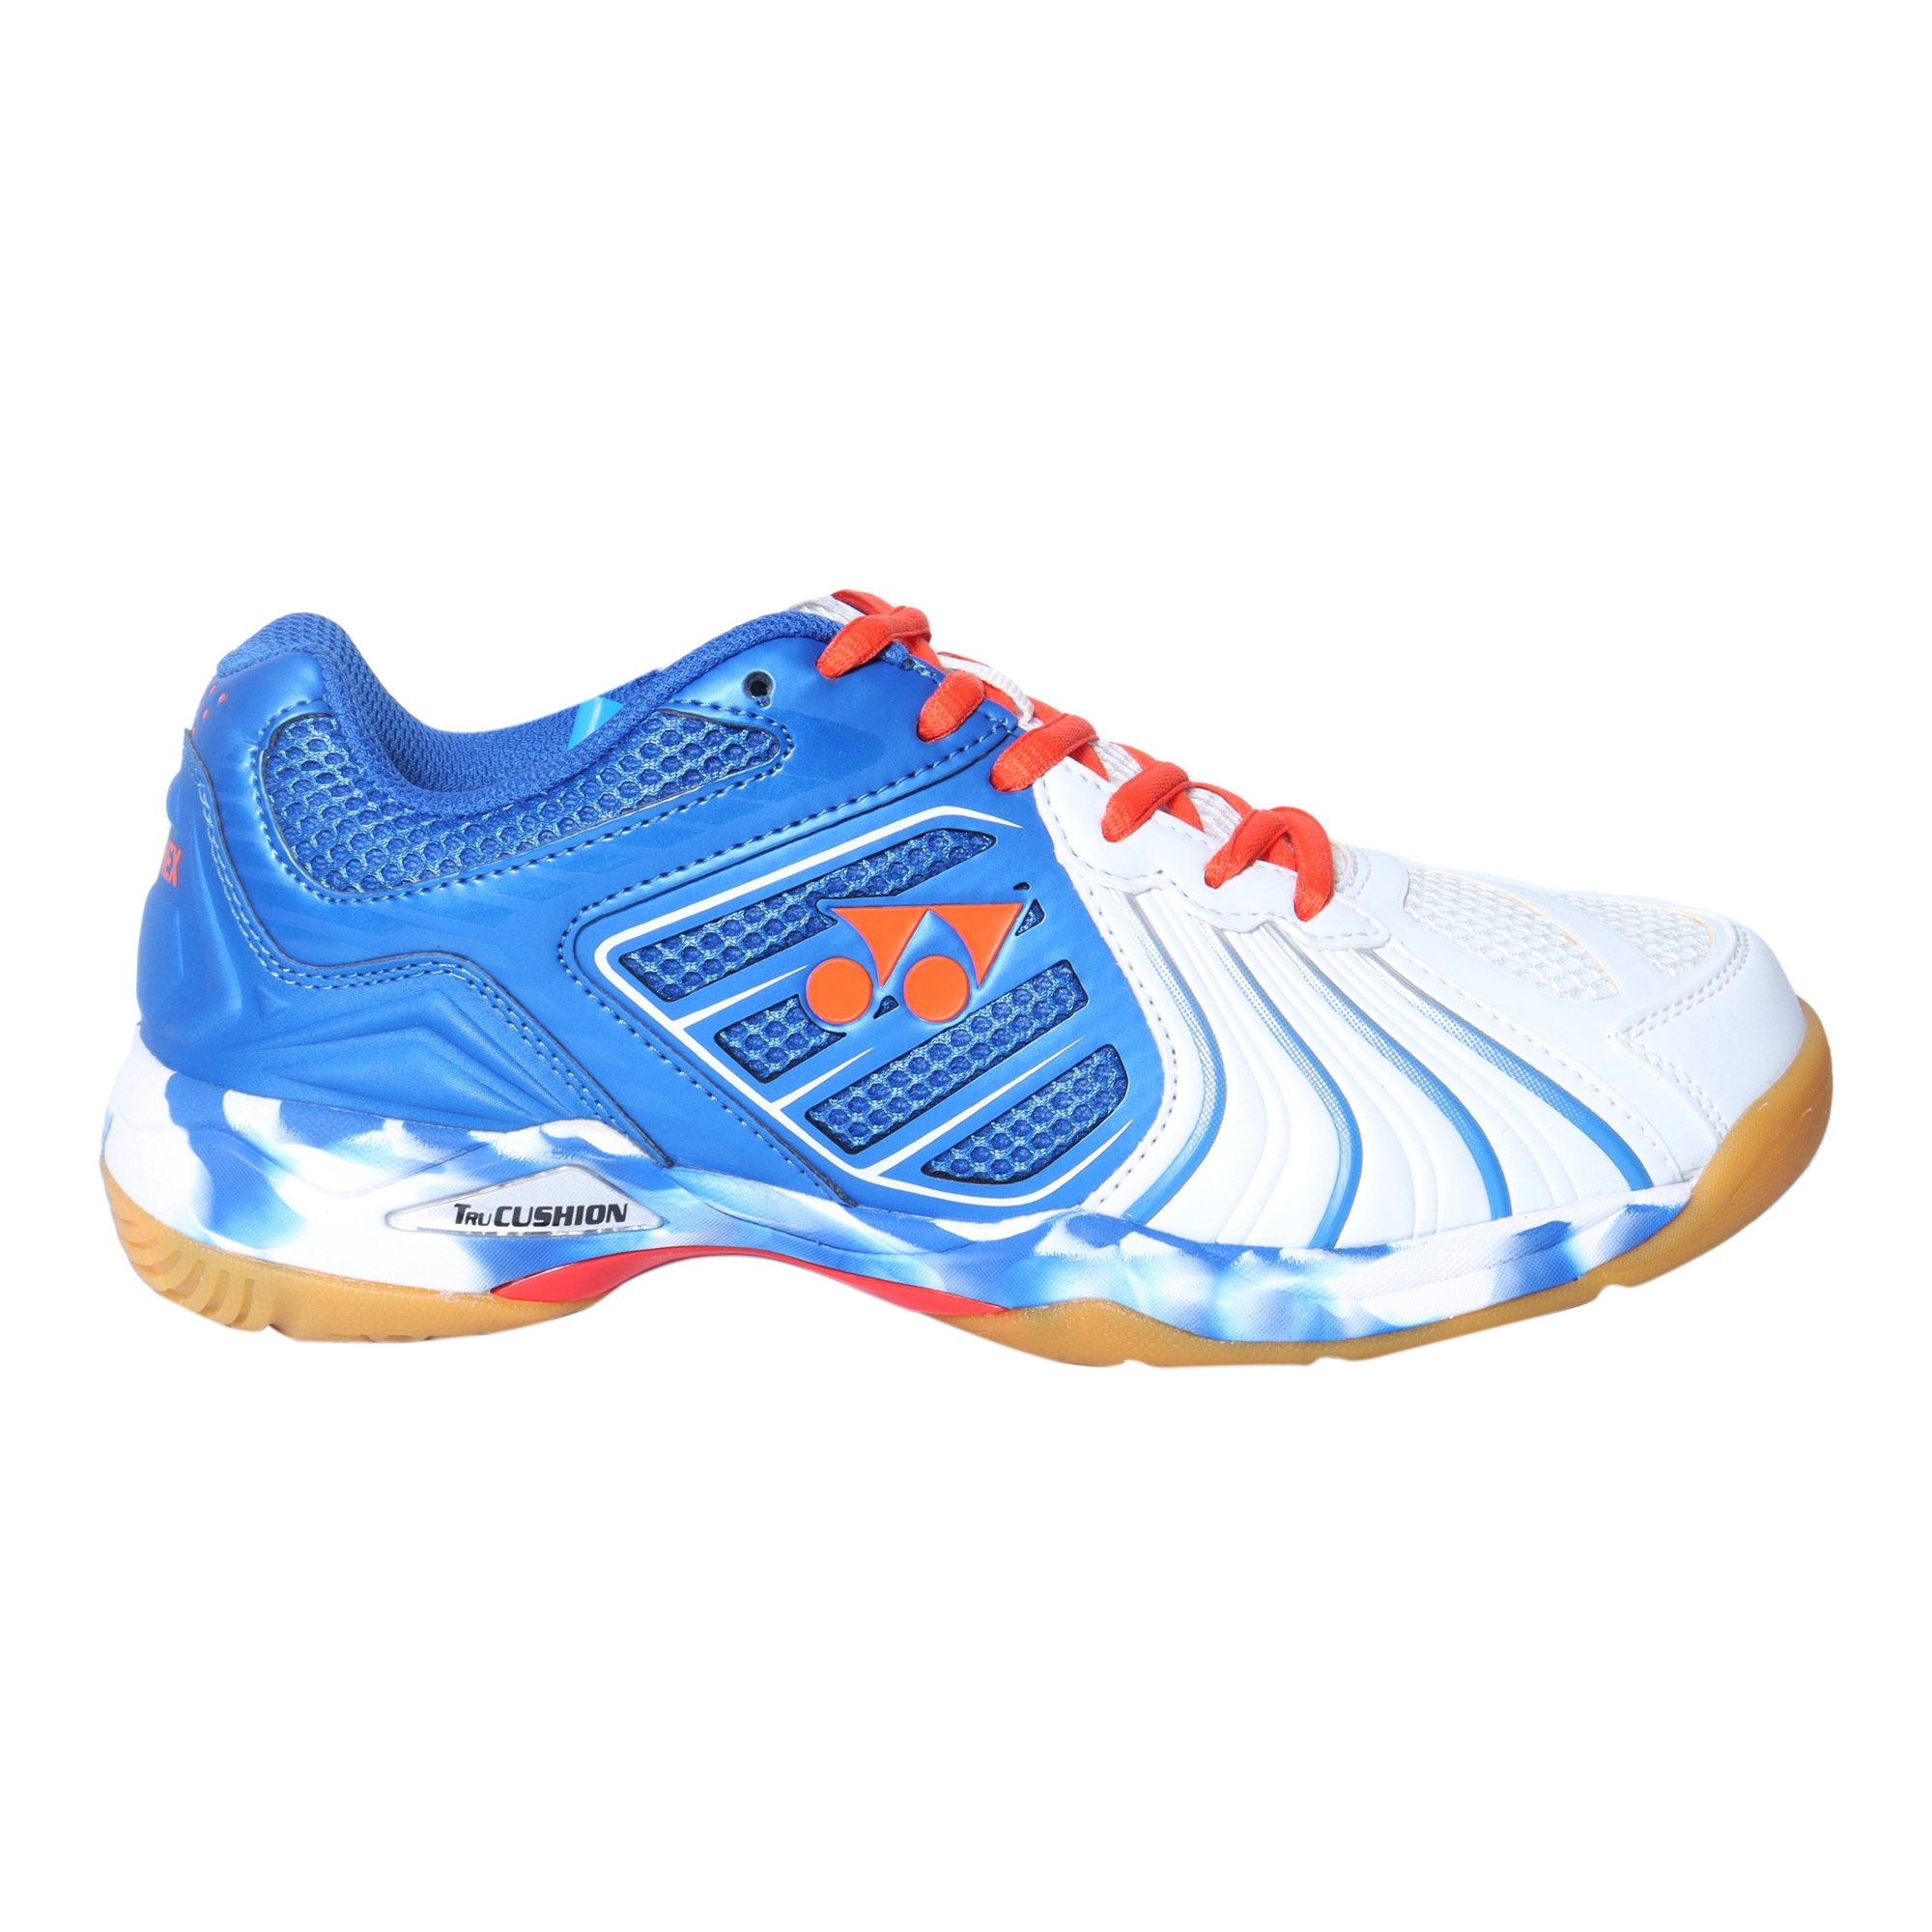 Buy Yonex Shoes and Clothing at Best Prices Online in Nepal